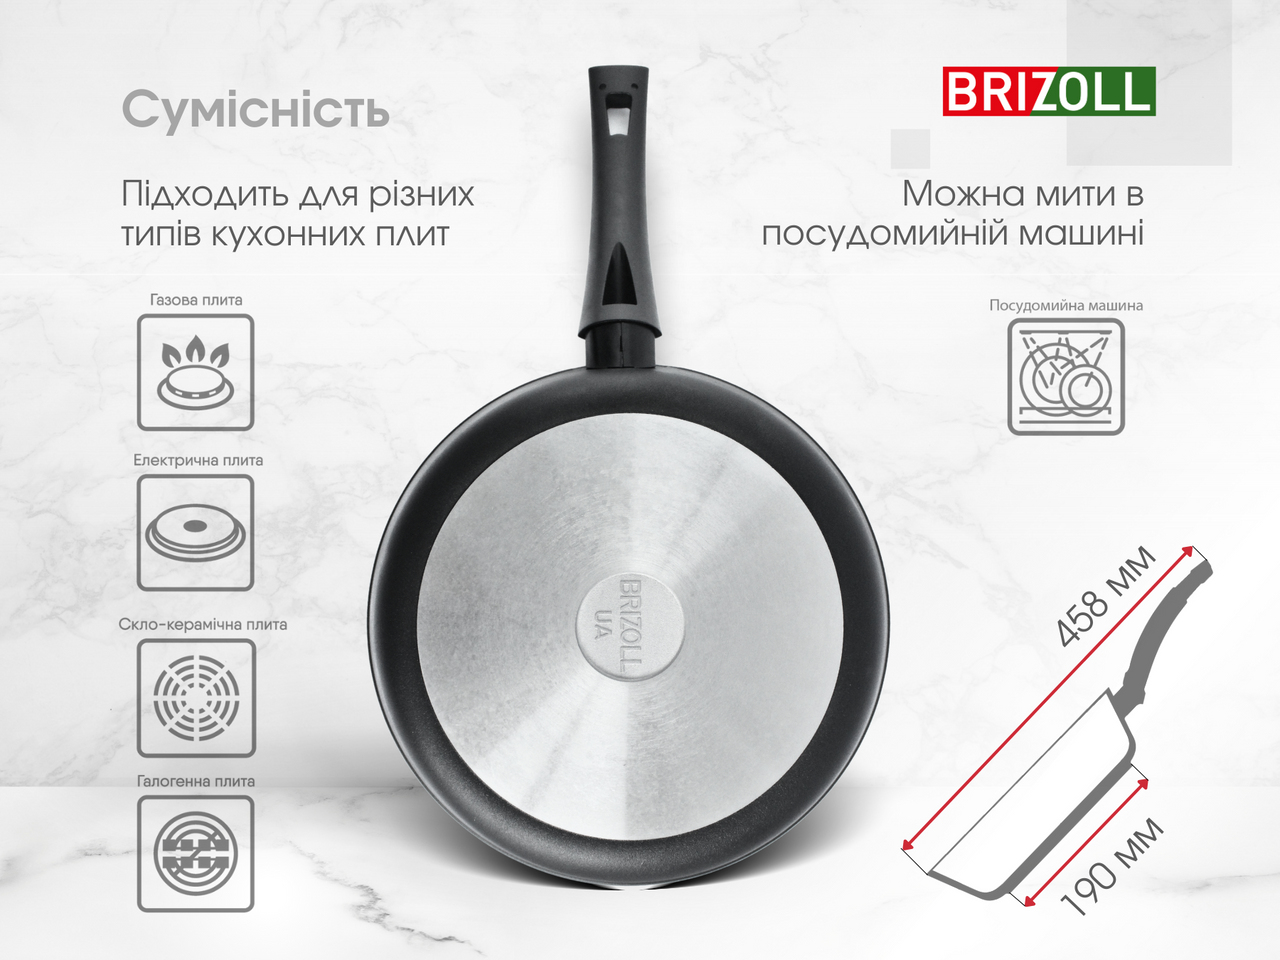 Frying pan 26 sm with non-stick coating FIRST with a glass lid